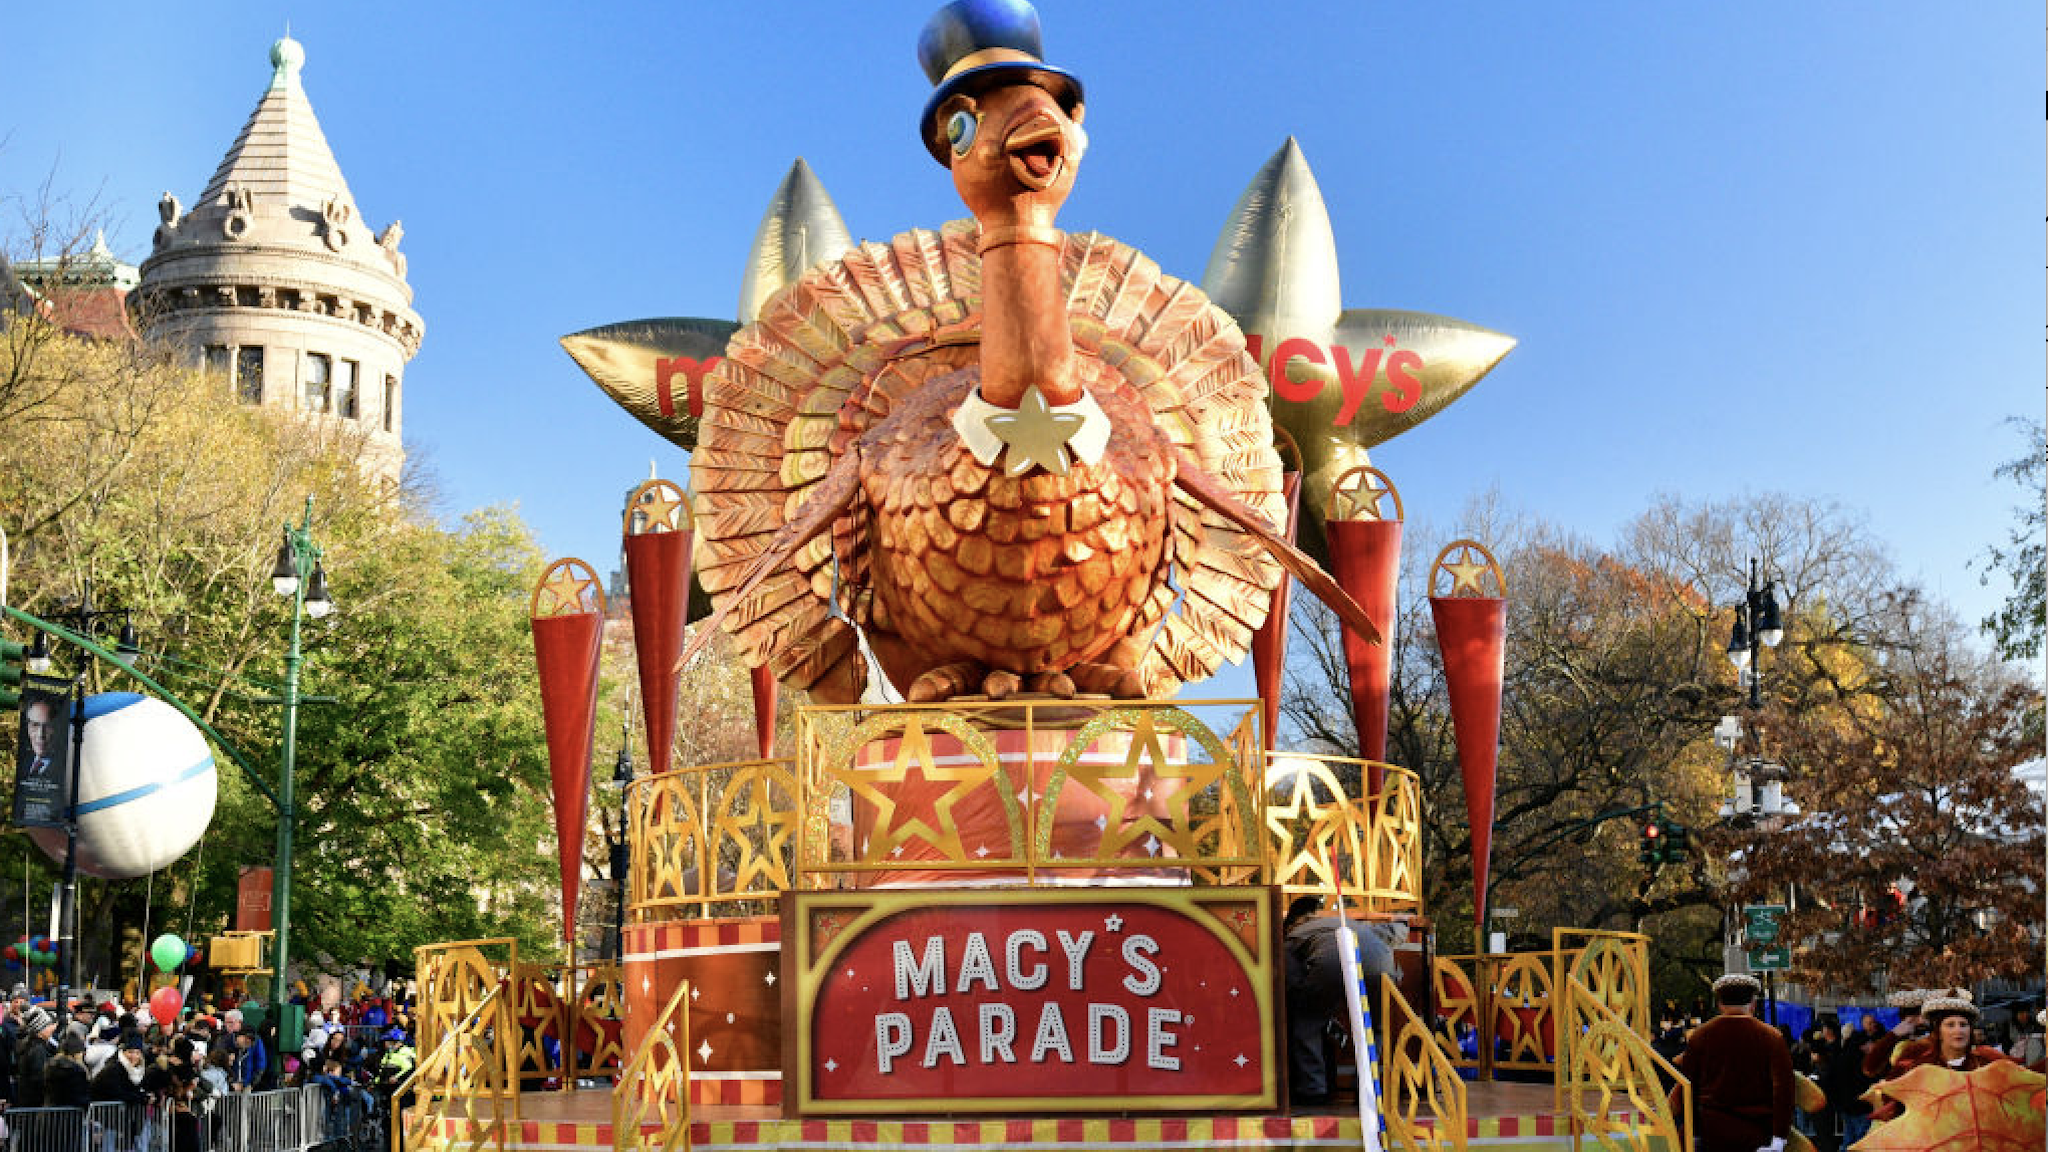 Tom Turkey by Macy's float is waiting for the parade to start during 96th Macy's Thanksgiving Day Parade on November 24, 2022 in New York City.